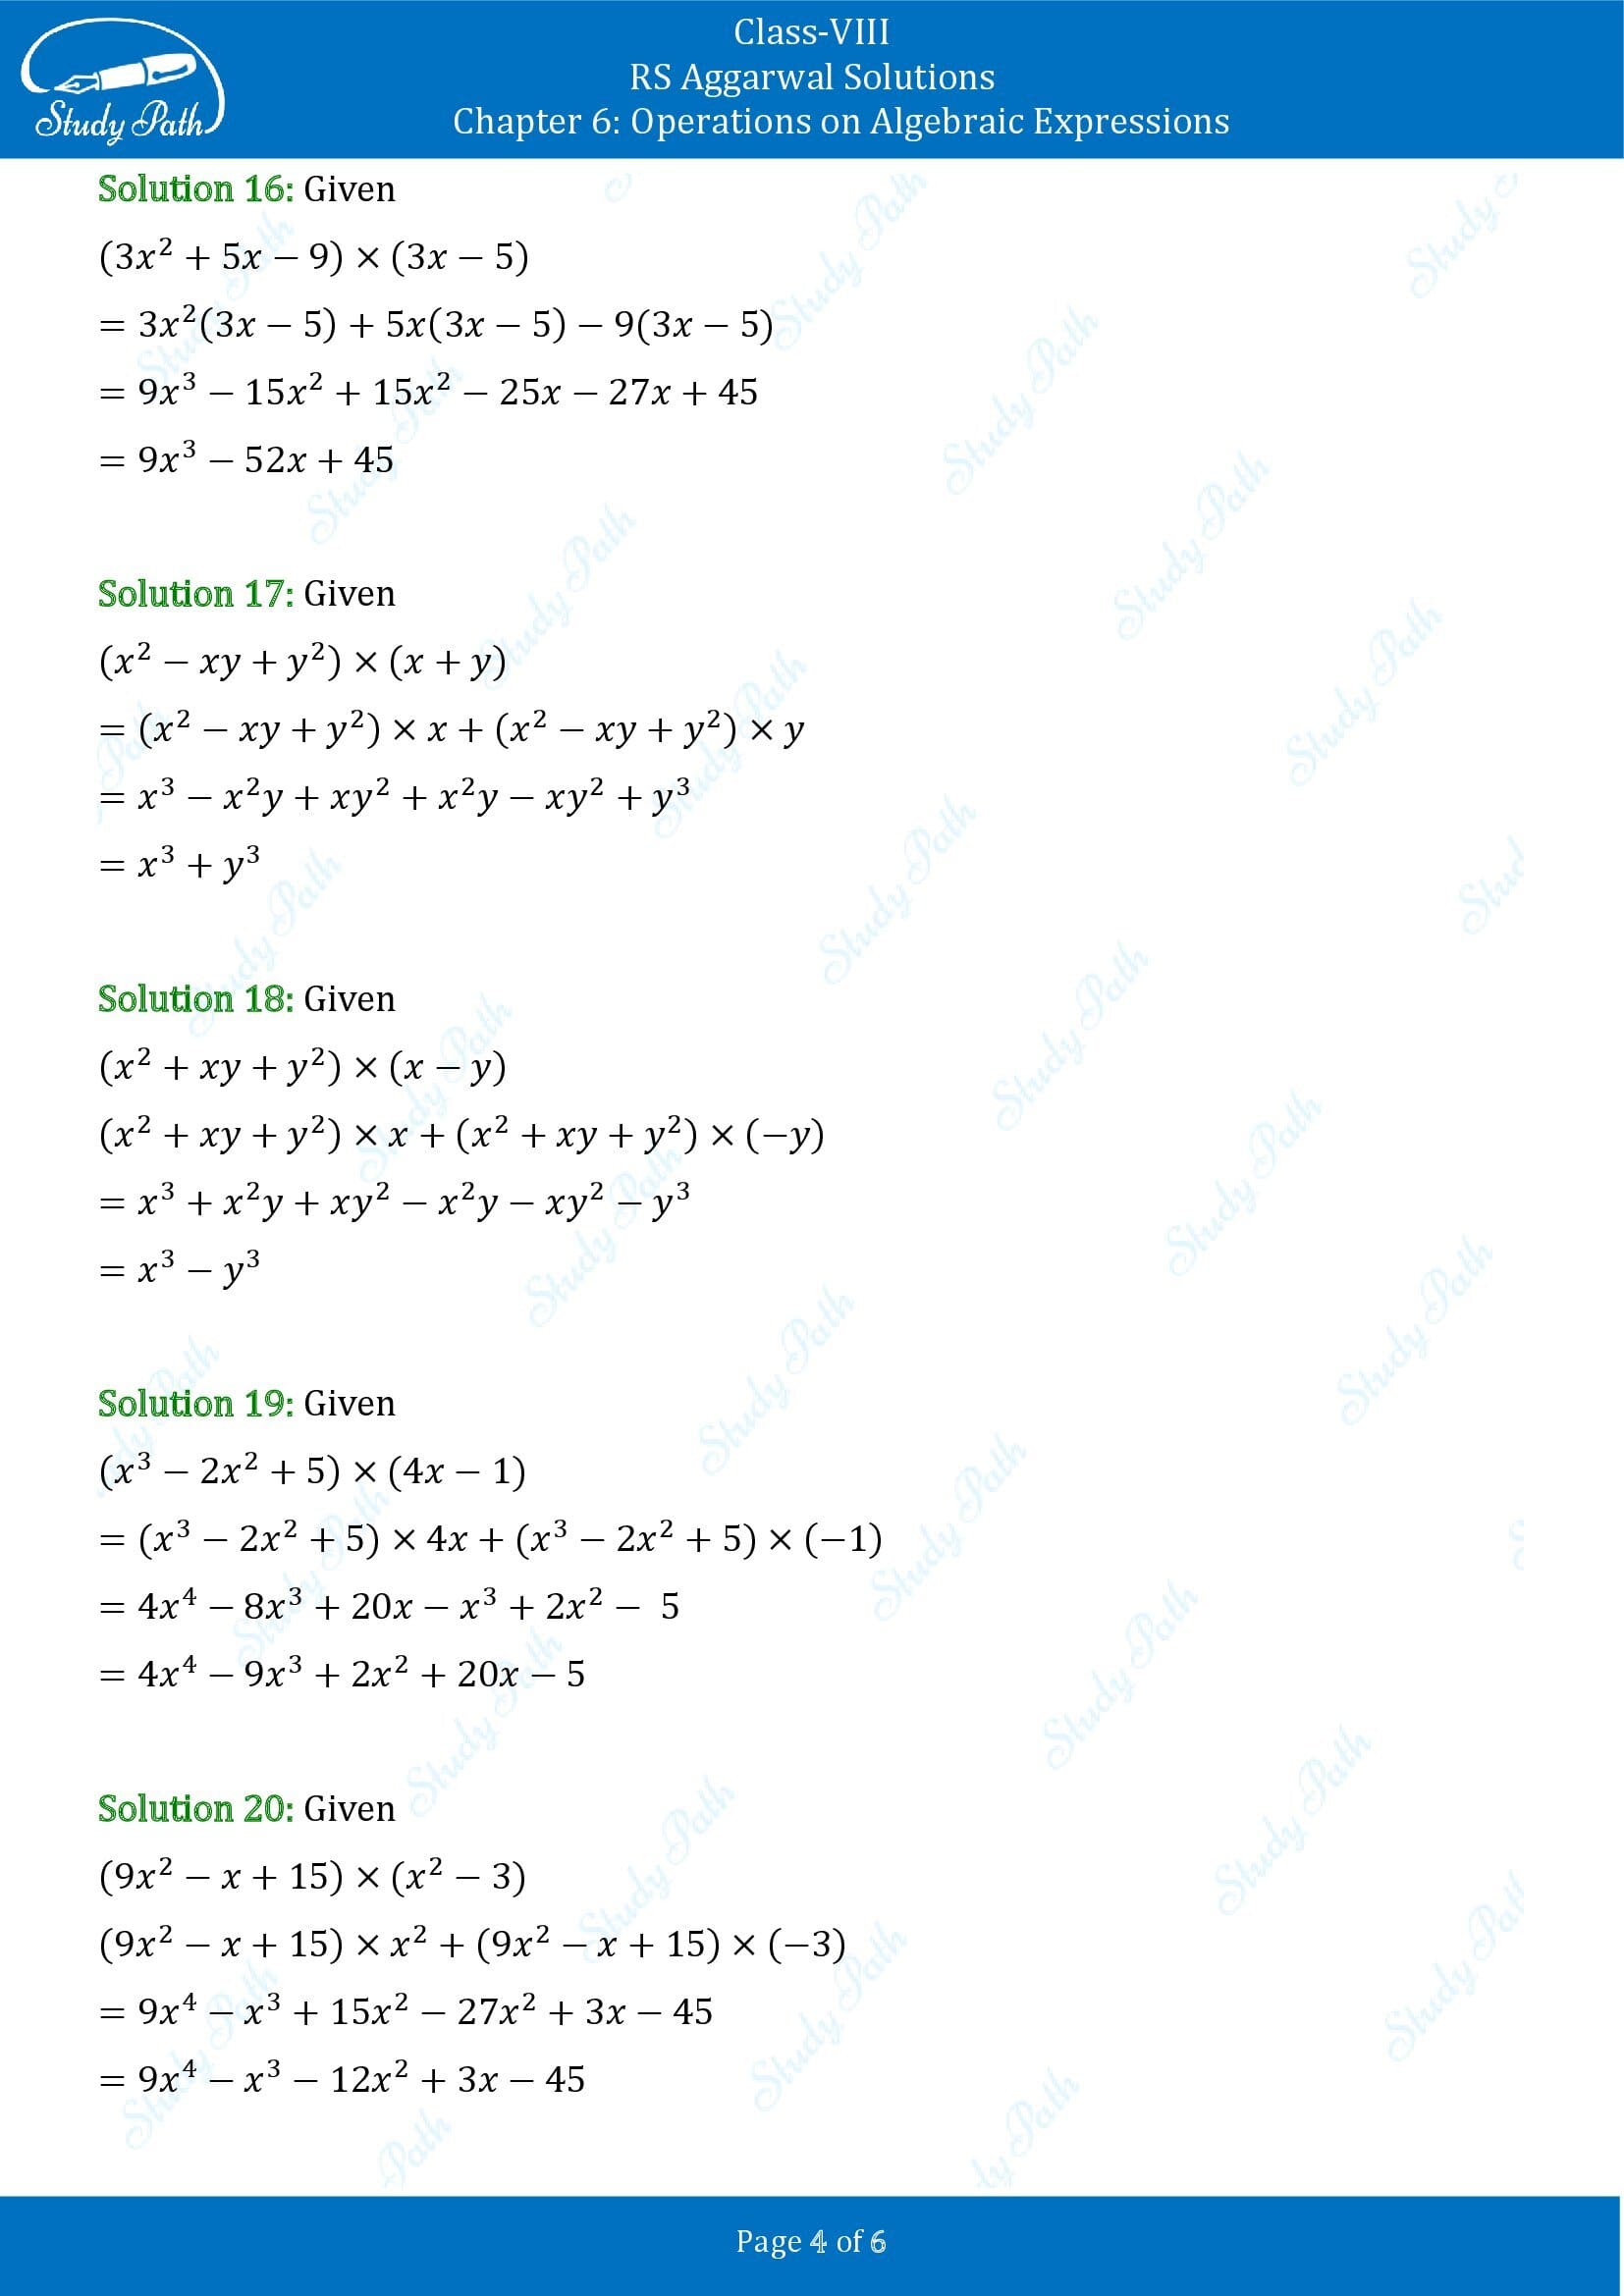 RS Aggarwal Solutions Class 8 Chapter 6 Operations on Algebraic Expressions Exercise 6B 00004